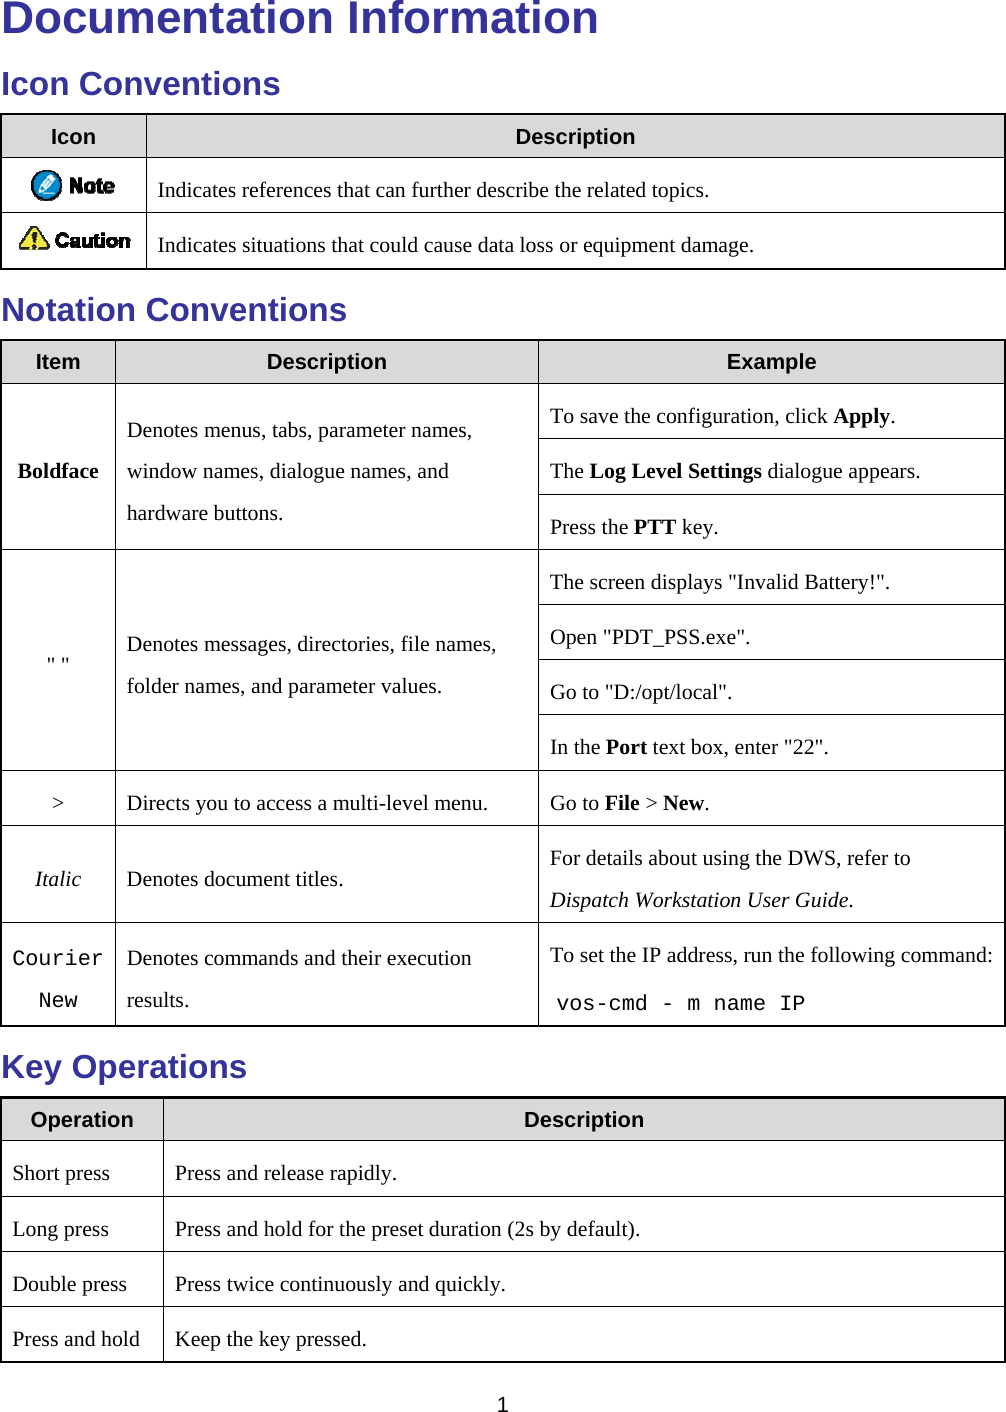   1  Documentation Information Icon Conventions Icon  Description  Indicates references that can further describe the related topics.  Indicates situations that could cause data loss or equipment damage. Notation Conventions Item  Description  Example Boldface Denotes menus, tabs, parameter names, window names, dialogue names, and hardware buttons. To save the configuration, click Apply. The Log Level Settings dialogue appears. Press the PTT key. &quot; &quot;  Denotes messages, directories, file names, folder names, and parameter values. The screen displays &quot;Invalid Battery!&quot;. Open &quot;PDT_PSS.exe&quot;. Go to &quot;D:/opt/local&quot;. In the Port text box, enter &quot;22&quot;. &gt;  Directs you to access a multi-level menu.  Go to File &gt; New. Italic  Denotes document titles.  For details about using the DWS, refer to Dispatch Workstation User Guide. Courier New Denotes commands and their execution results. To set the IP address, run the following command: vos-cmd - m name IP Key Operations Operation  Description Short press  Press and release rapidly. Long press  Press and hold for the preset duration (2s by default). Double press  Press twice continuously and quickly. Press and hold  Keep the key pressed. 